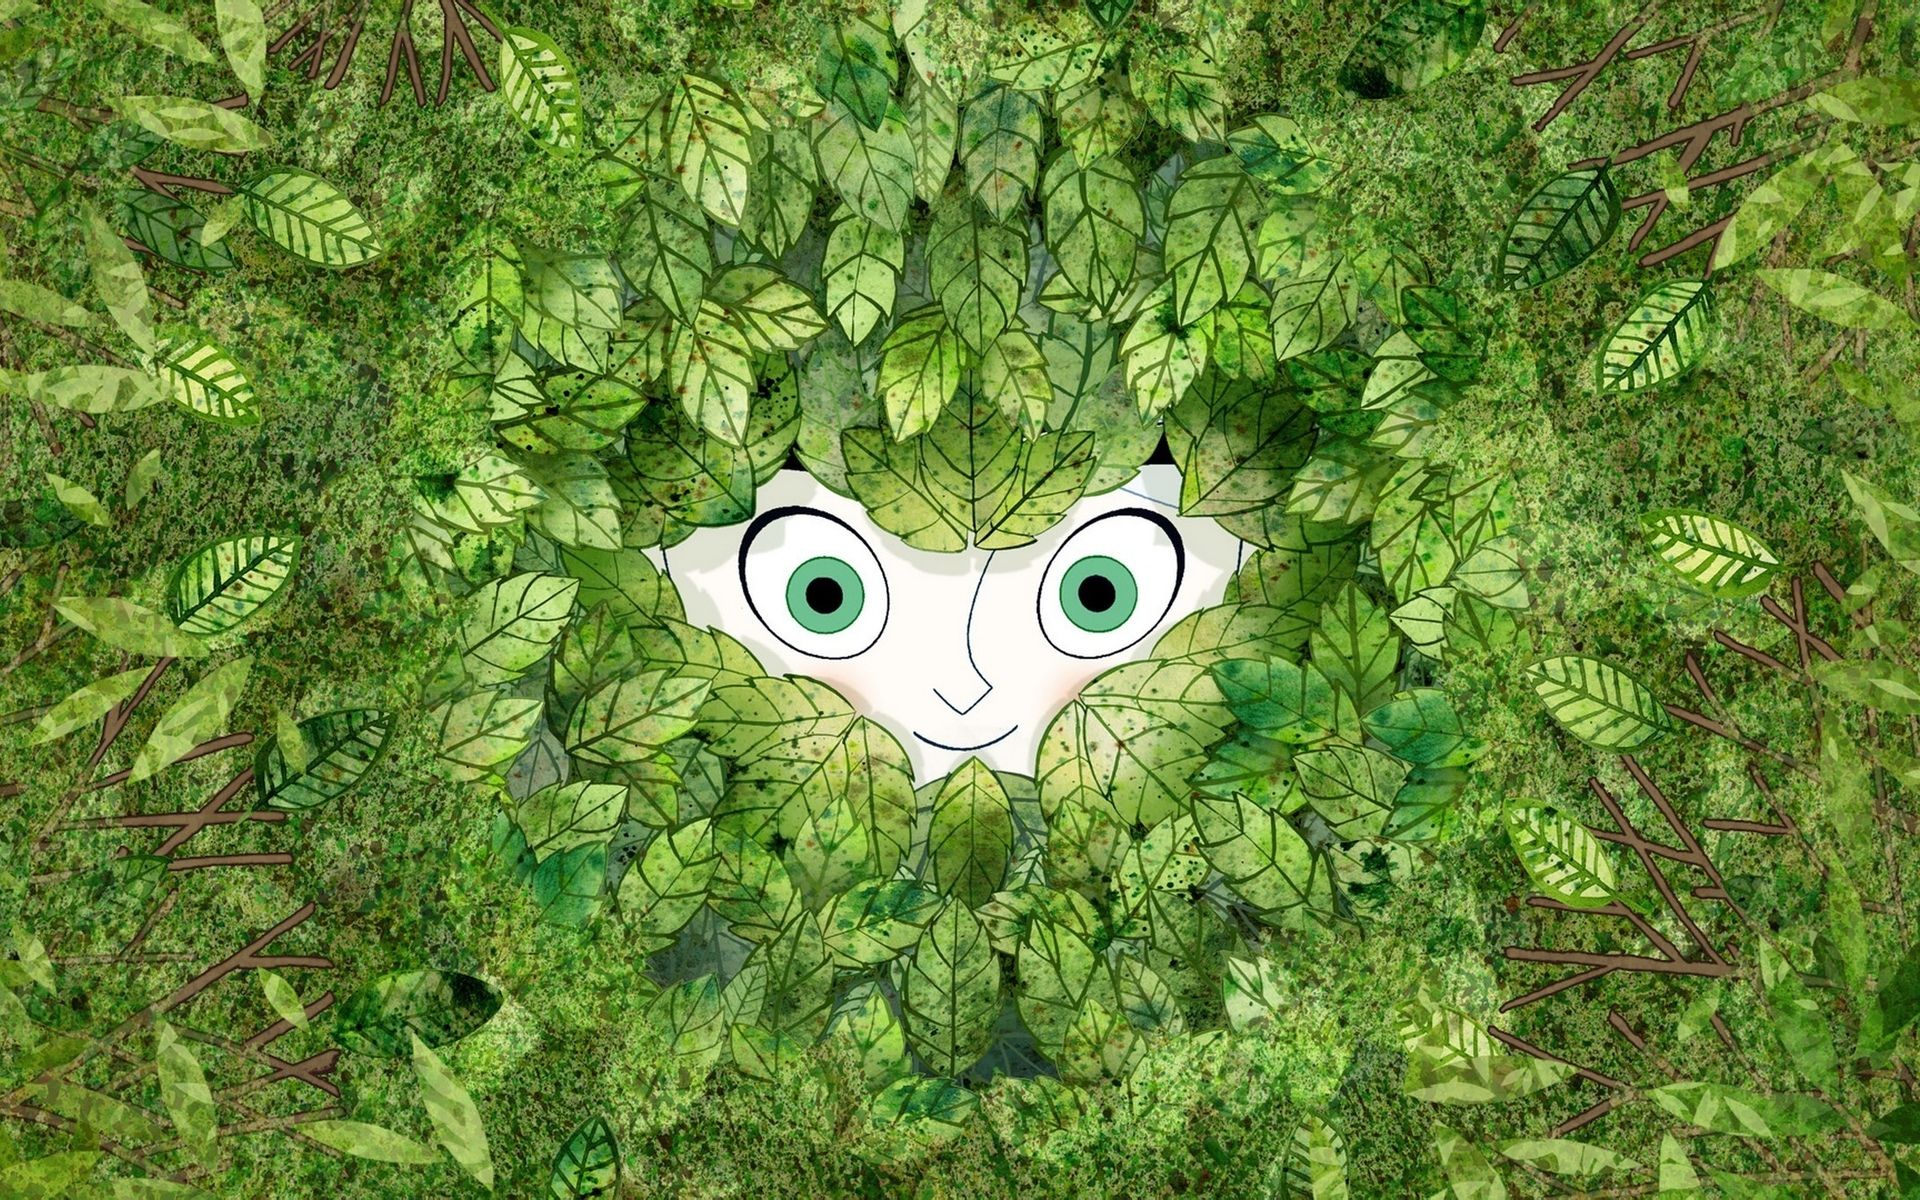 The Secret of Kells: Artistry Requires Bravery | Let There Be Movies